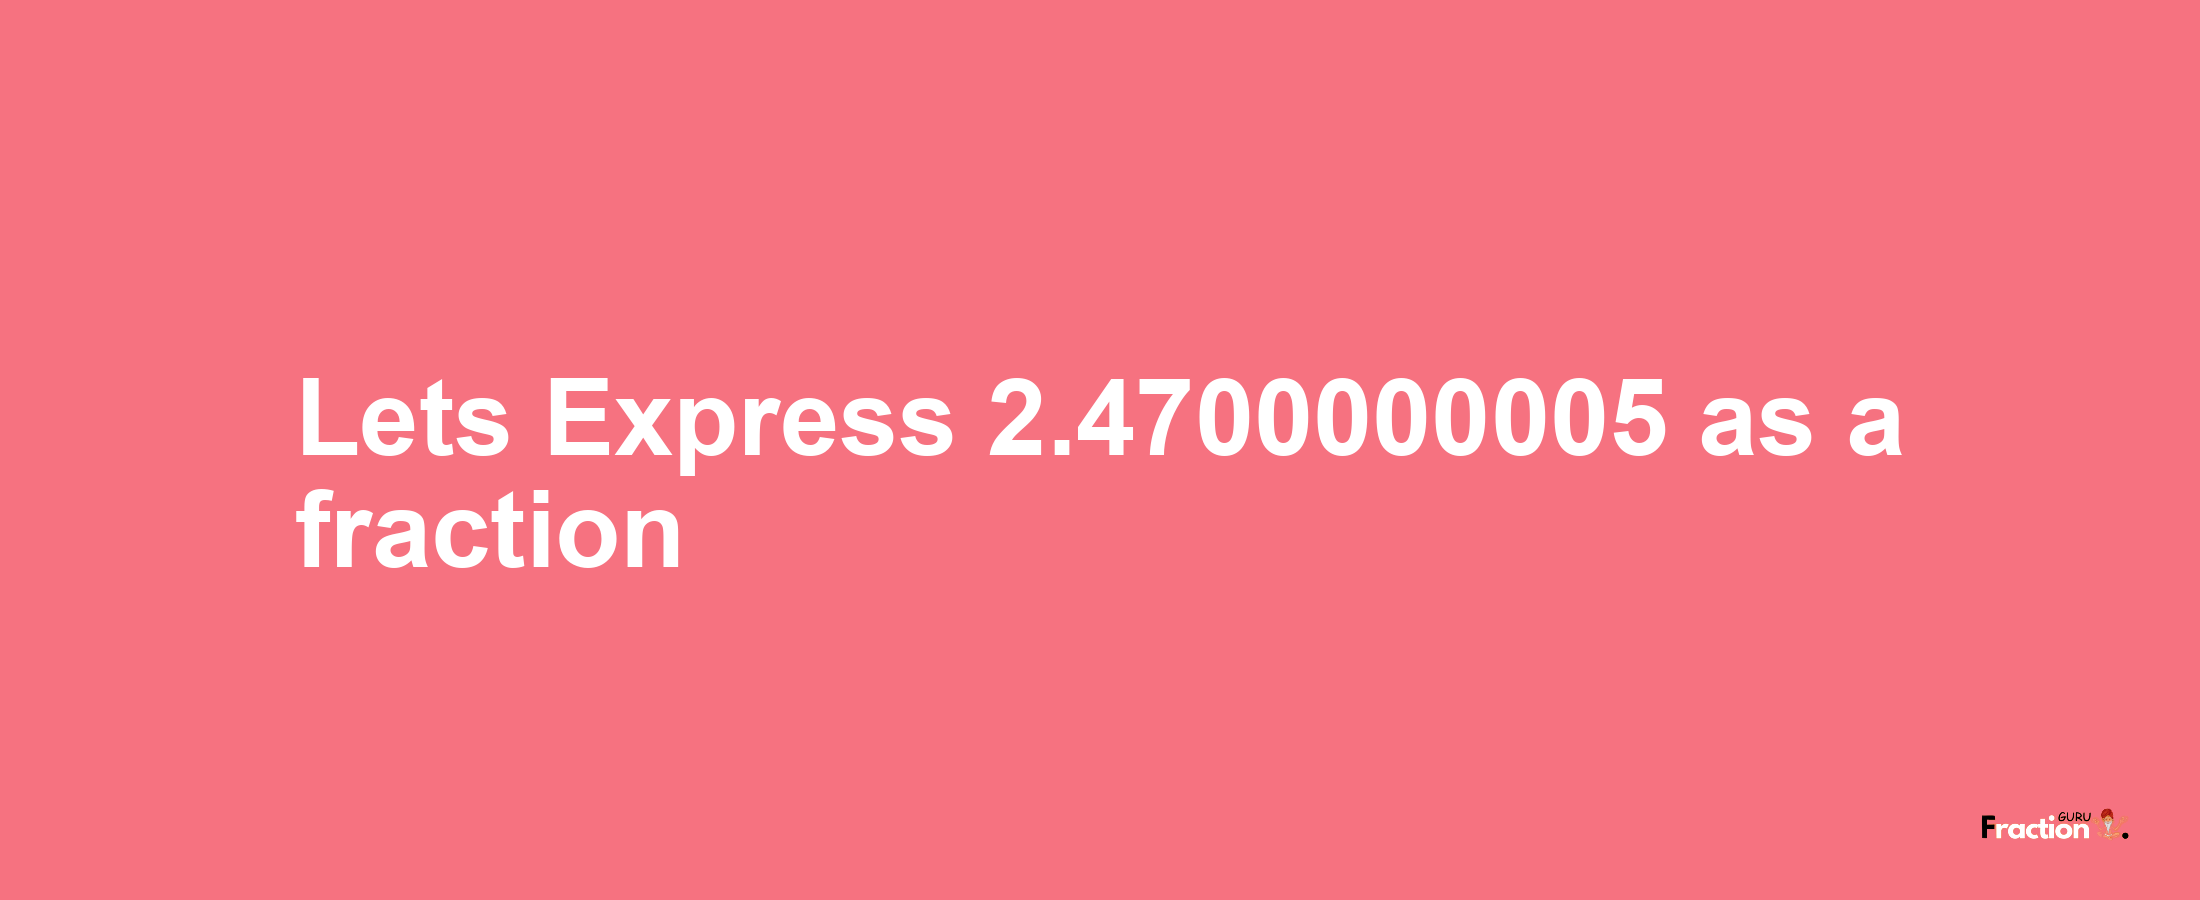 Lets Express 2.4700000005 as afraction